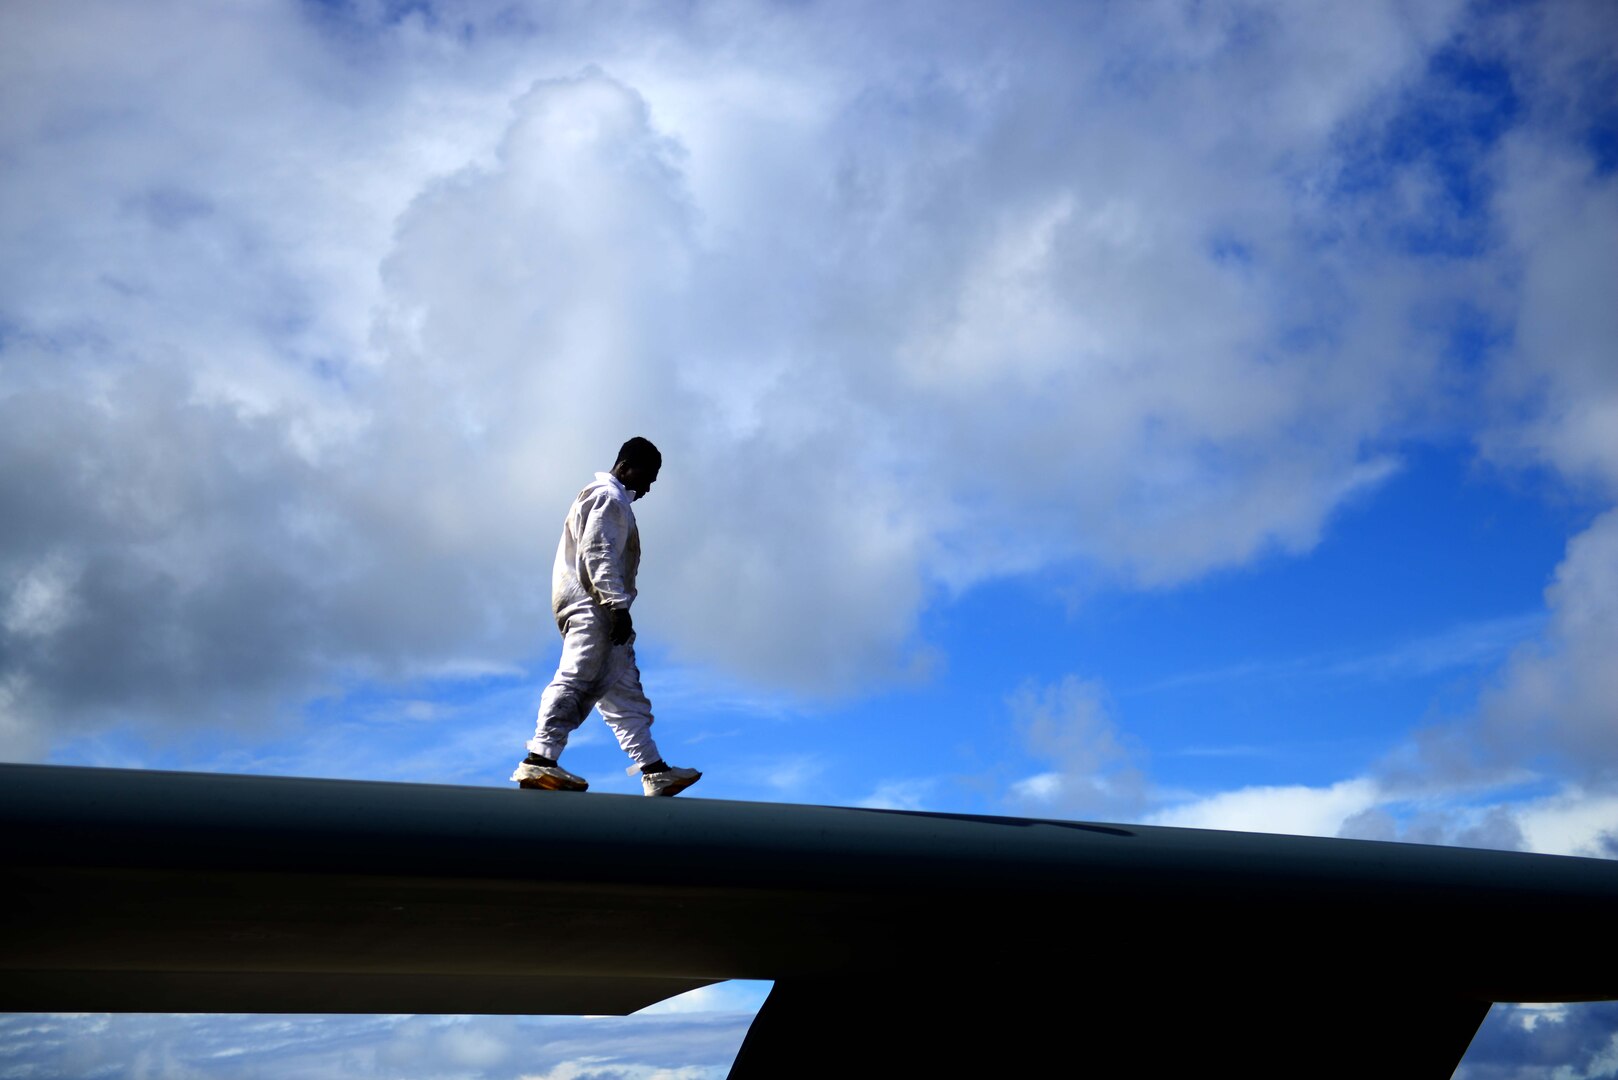 U.S. Air Force Staff Sgt. Elijah Fleming, a crew chief assigned to the 509th Aircraft Maintenance Squadron, walks on top of the B-2 Spirit aircraft while performing post-flight inspections after a local training at Andersen Air Force Base, Guam, Jan. 17, 2017. Close to 200 Airmen from Whiteman Air Force Base, Mo., and Barksdale Air Force Base, La., deployed to Andersen AFB, in support of U.S. Strategic Command Bomber and Deterrence missions. USSTRATCOM bomber missions familiarize aircrew with airbases and operations in different Geographic Combatant Commands. (U.S. Air Force photo by Tech Sgt. Andy M. Kin)